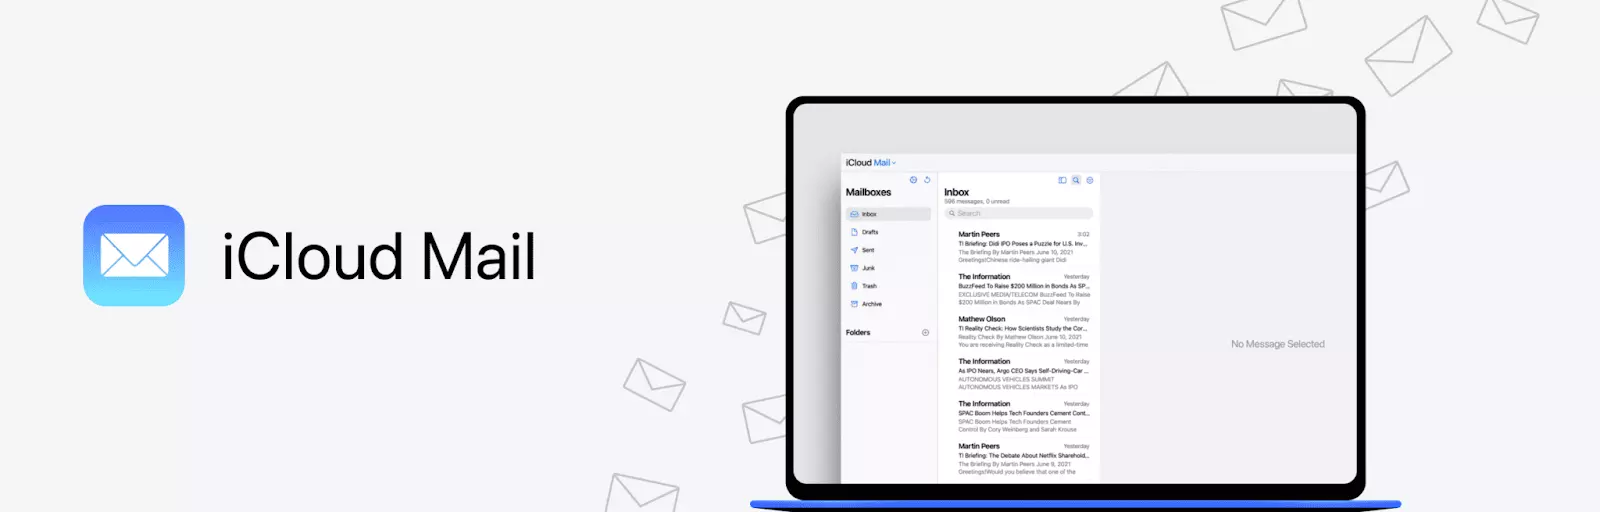 icloud Mail - Fastmail Alternative